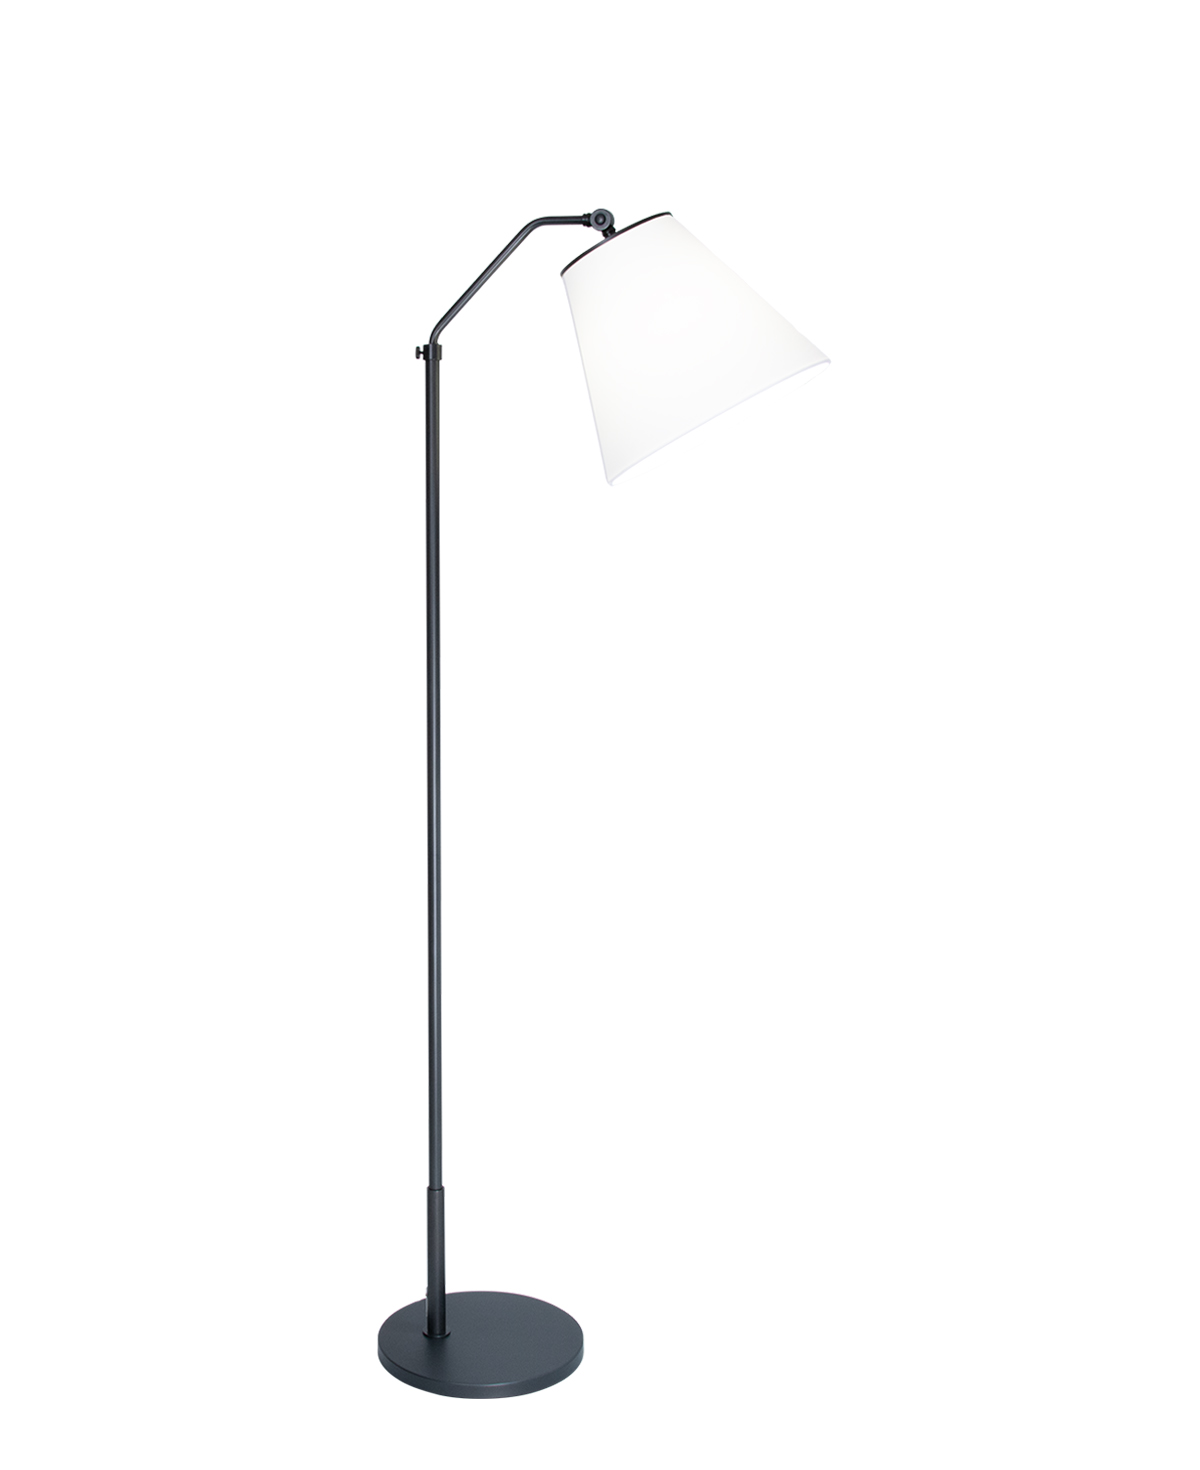 FlowDecor Ward Floor Lamp in metal with bronze finish and off-white cotton tapered drum shade (# 4453)